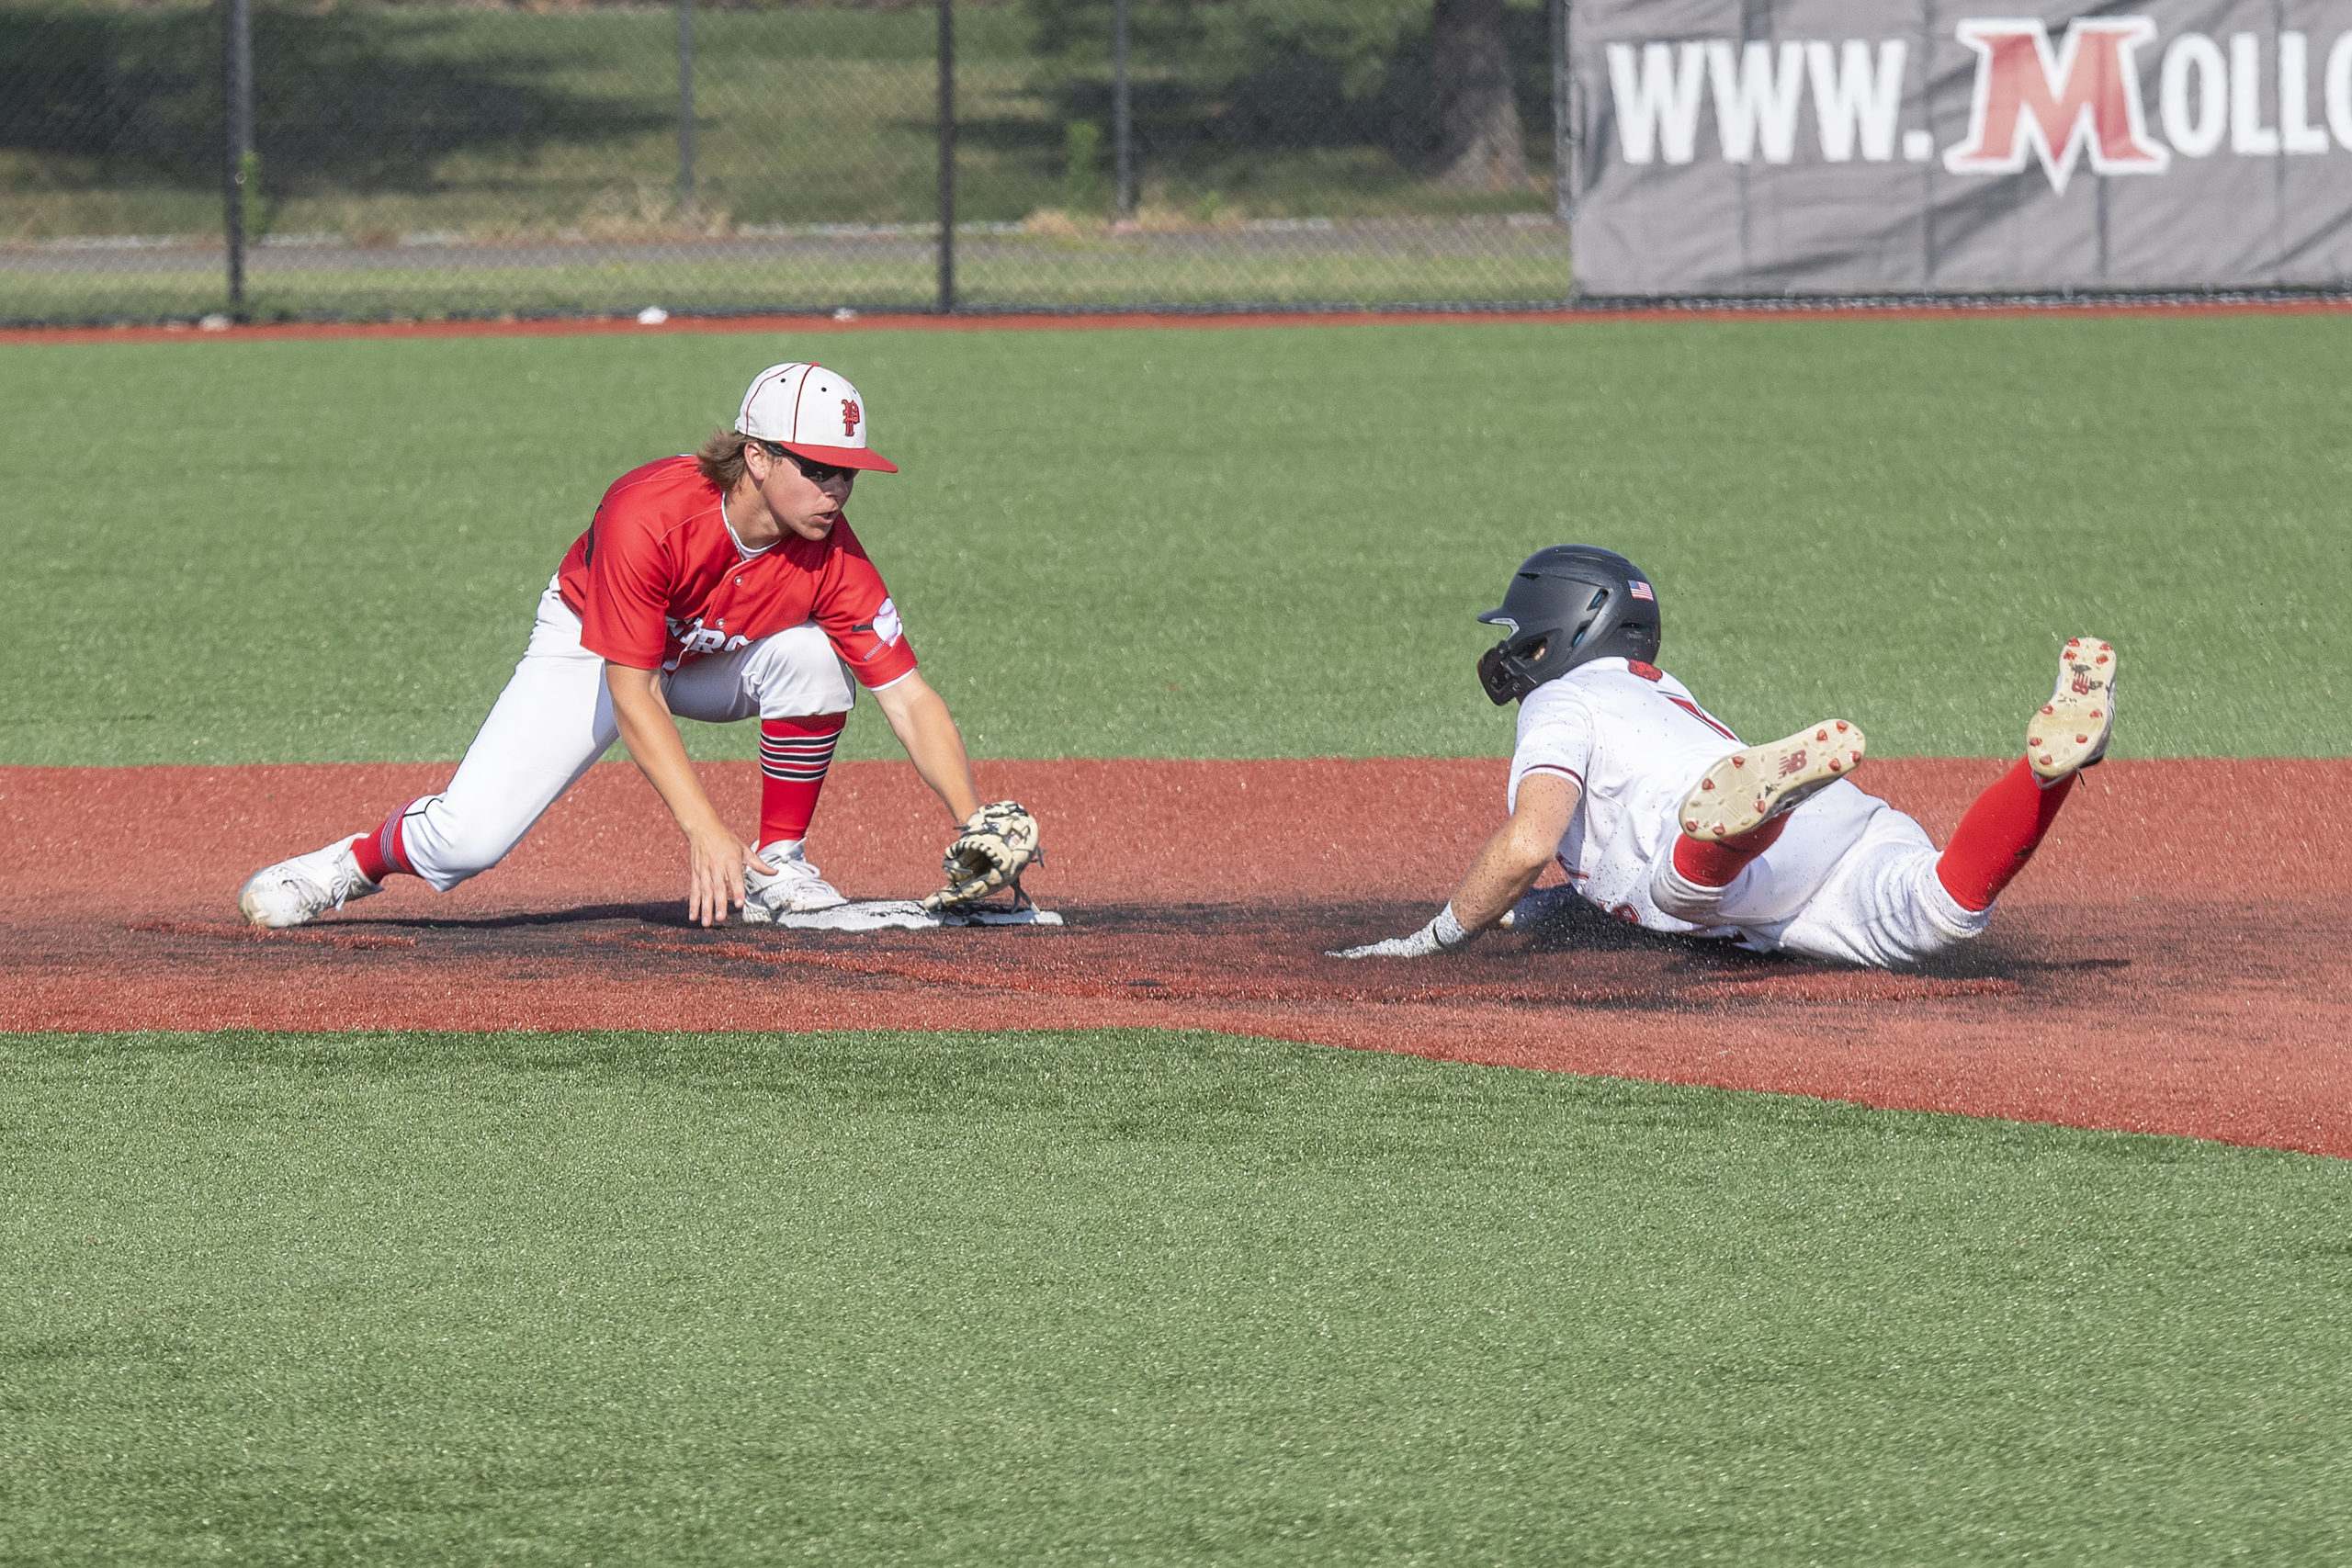 Whaler Christian Pantina thwarts an attempt to steal second base after receiving a throw from catcher Tucker Schiavoni.